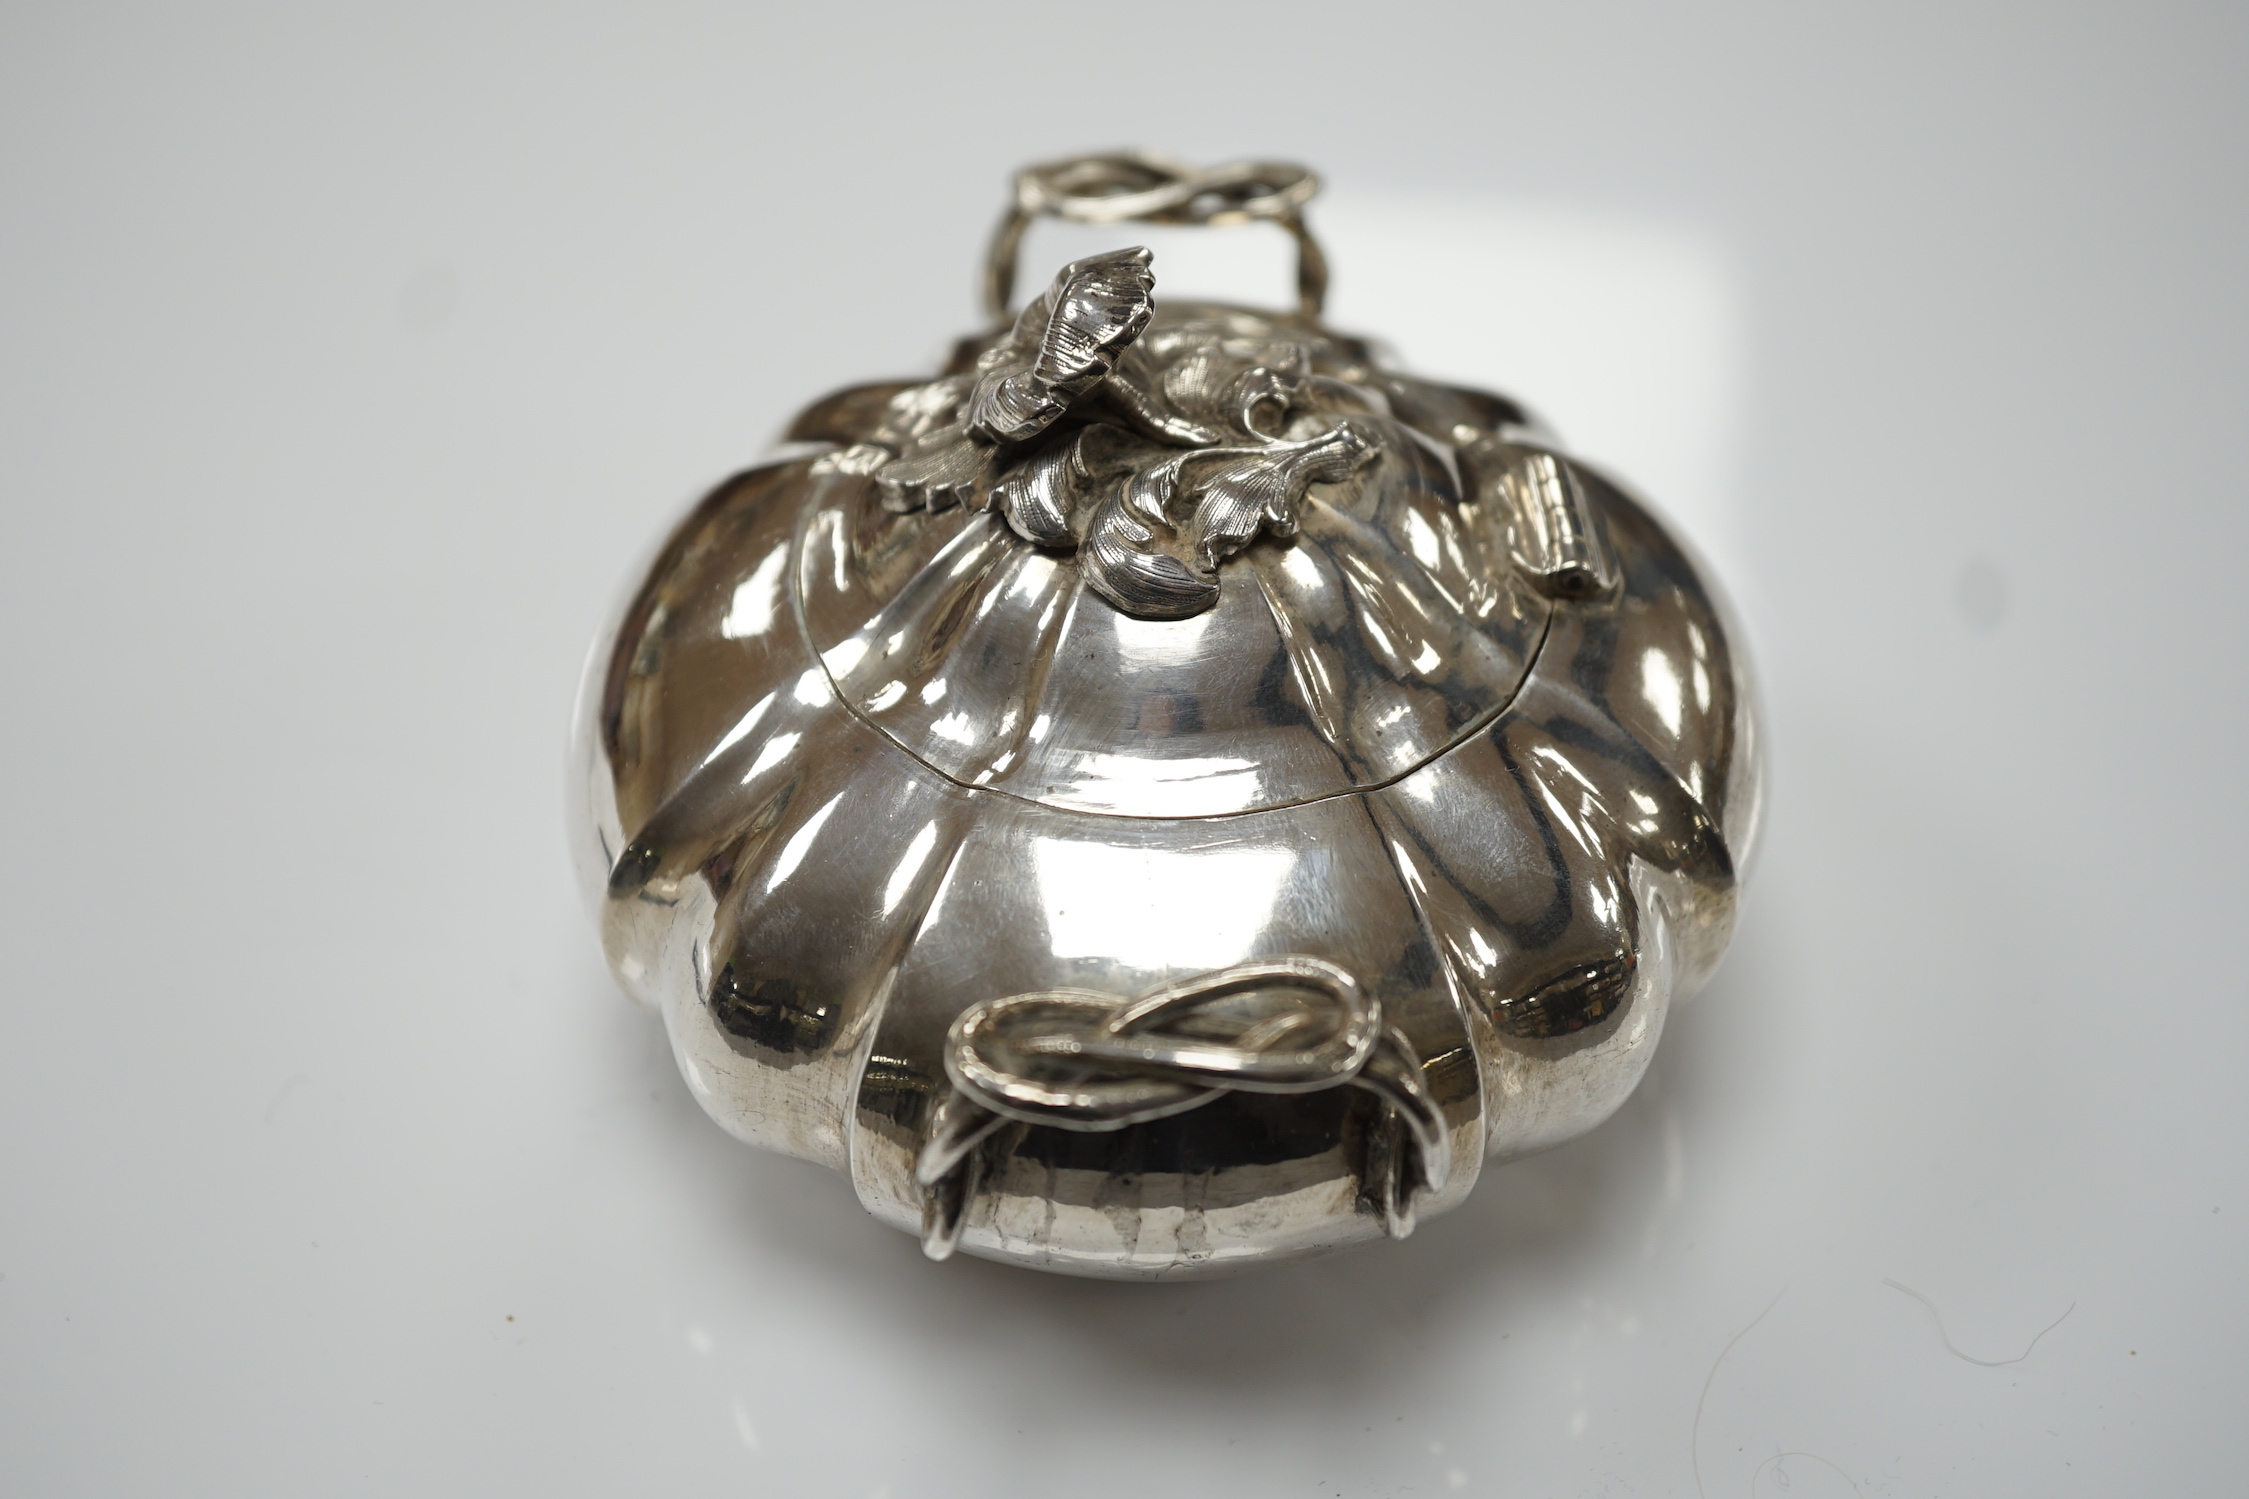 A mid 19th century Russian 84 zolotnik two handle sugar bowl and hinged cover, assay master possibly Vasily Surotsov, width over handles, 13.5cm, 10oz.